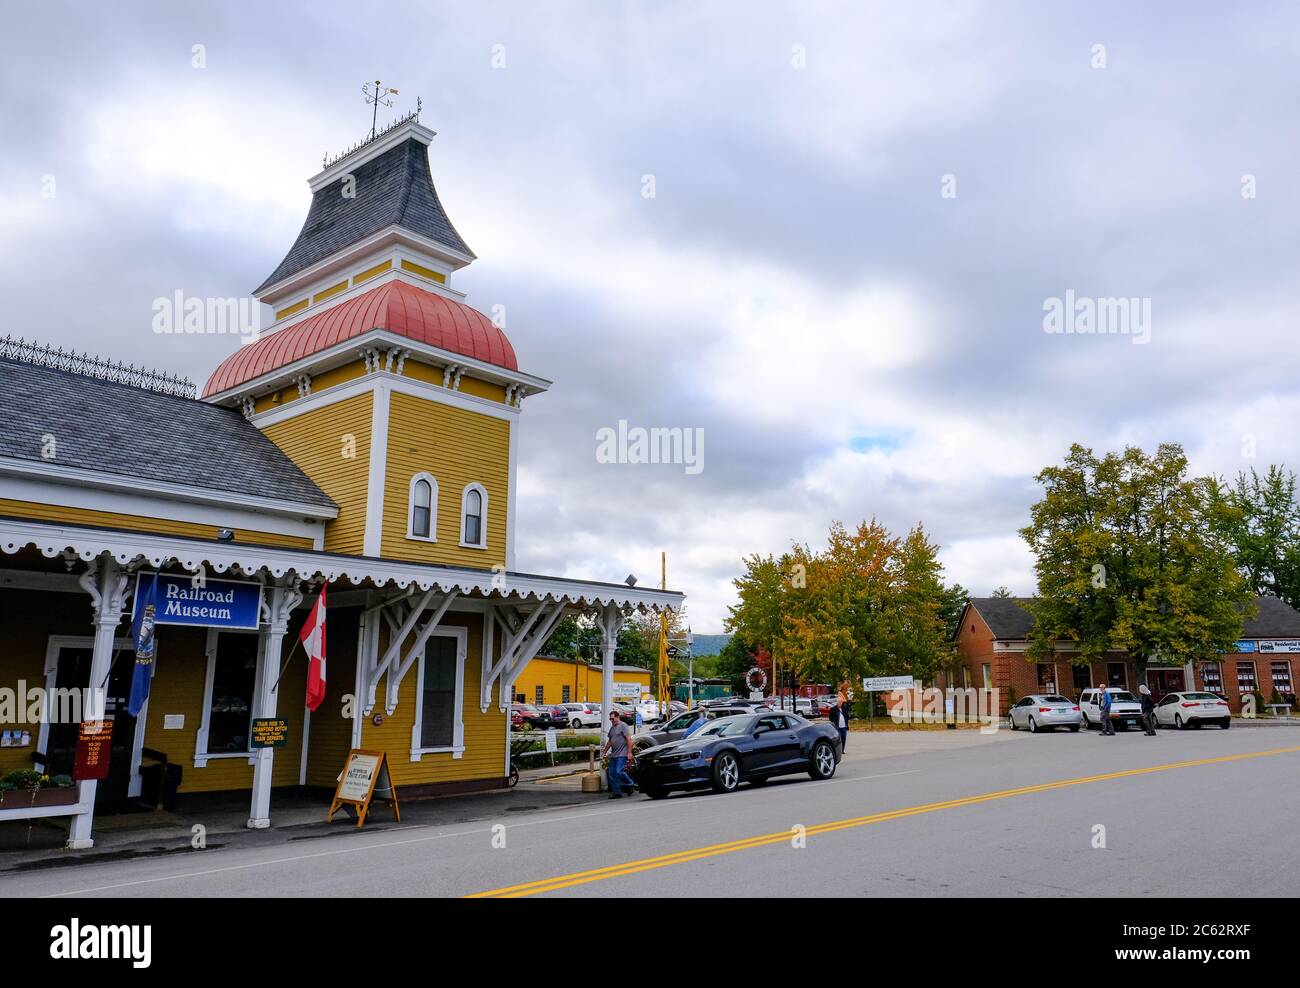 Classic US styled railroad station showing the timber built design in this popular tourist destination. Stock Photo